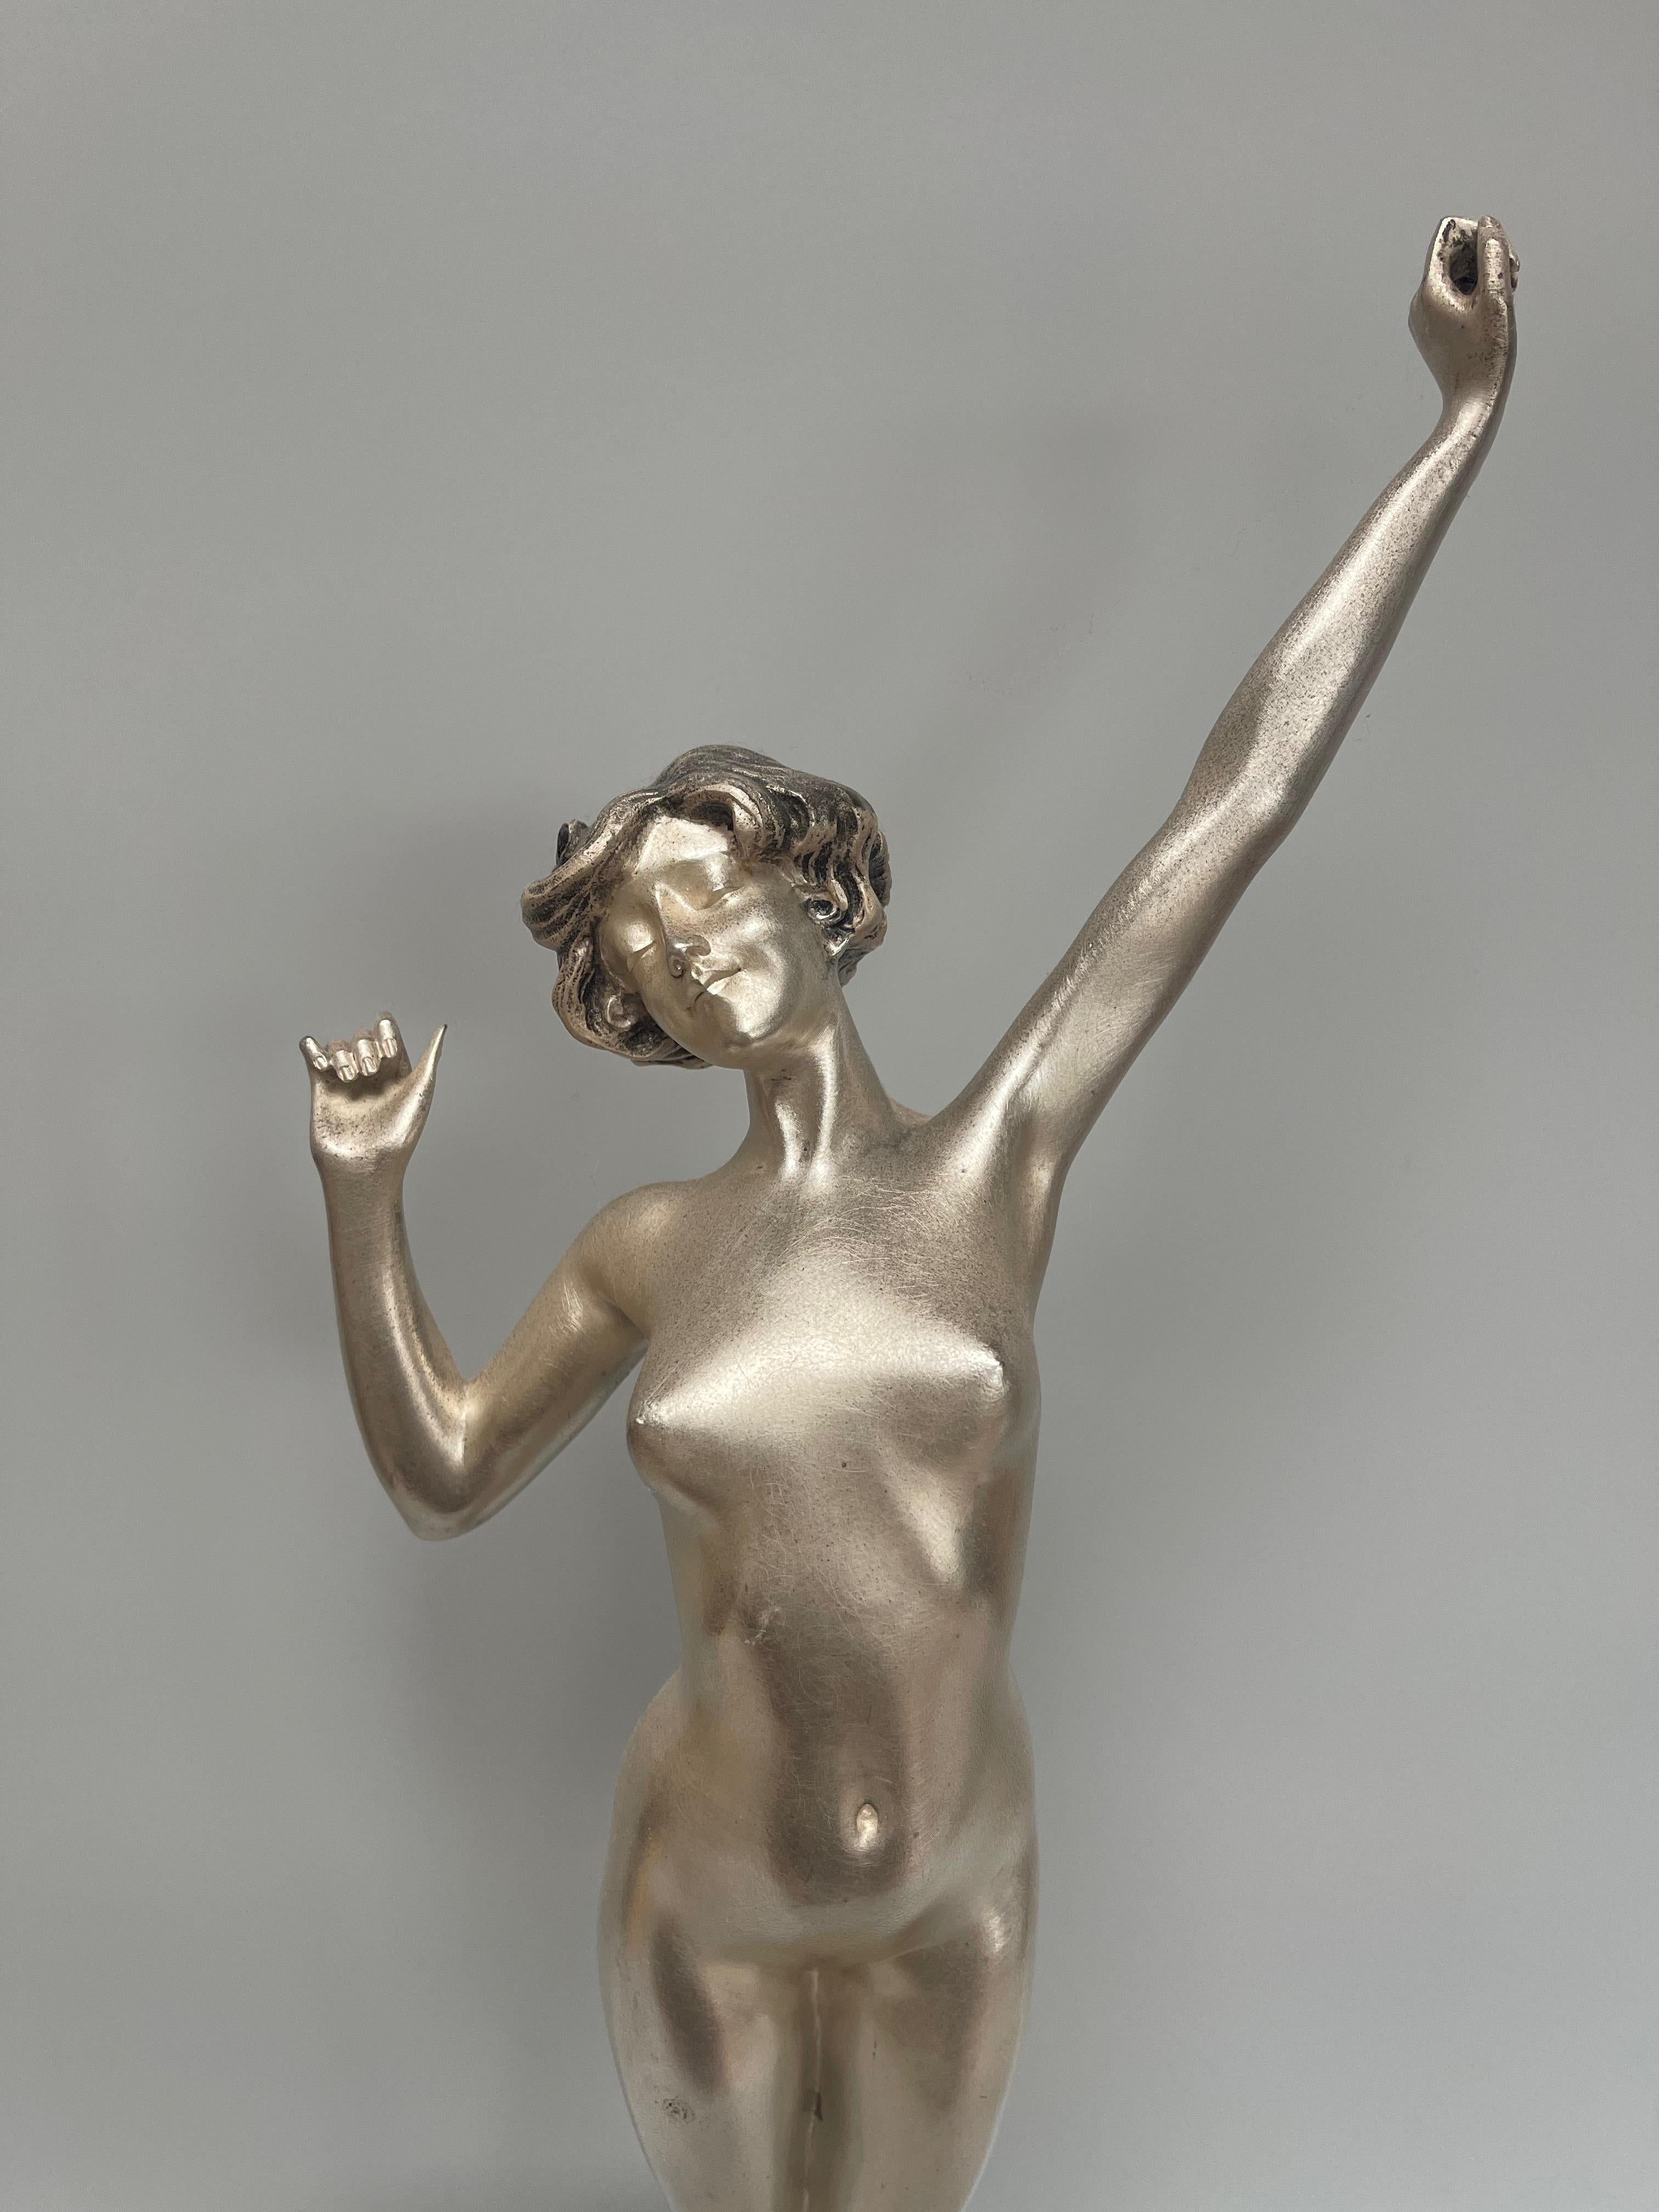 Silvered bronze around 1925 on a marble base. s
Signed on the marble P Philippe.

In a perfect state

Total height: 64.5 cm 25.39 in
Depth: 15cm 5.9in
Width: 20cm. 7.87in
Base: 10.2cm x 10.2cm x 15.5cm


Paul Philippe (1870–1930) was a